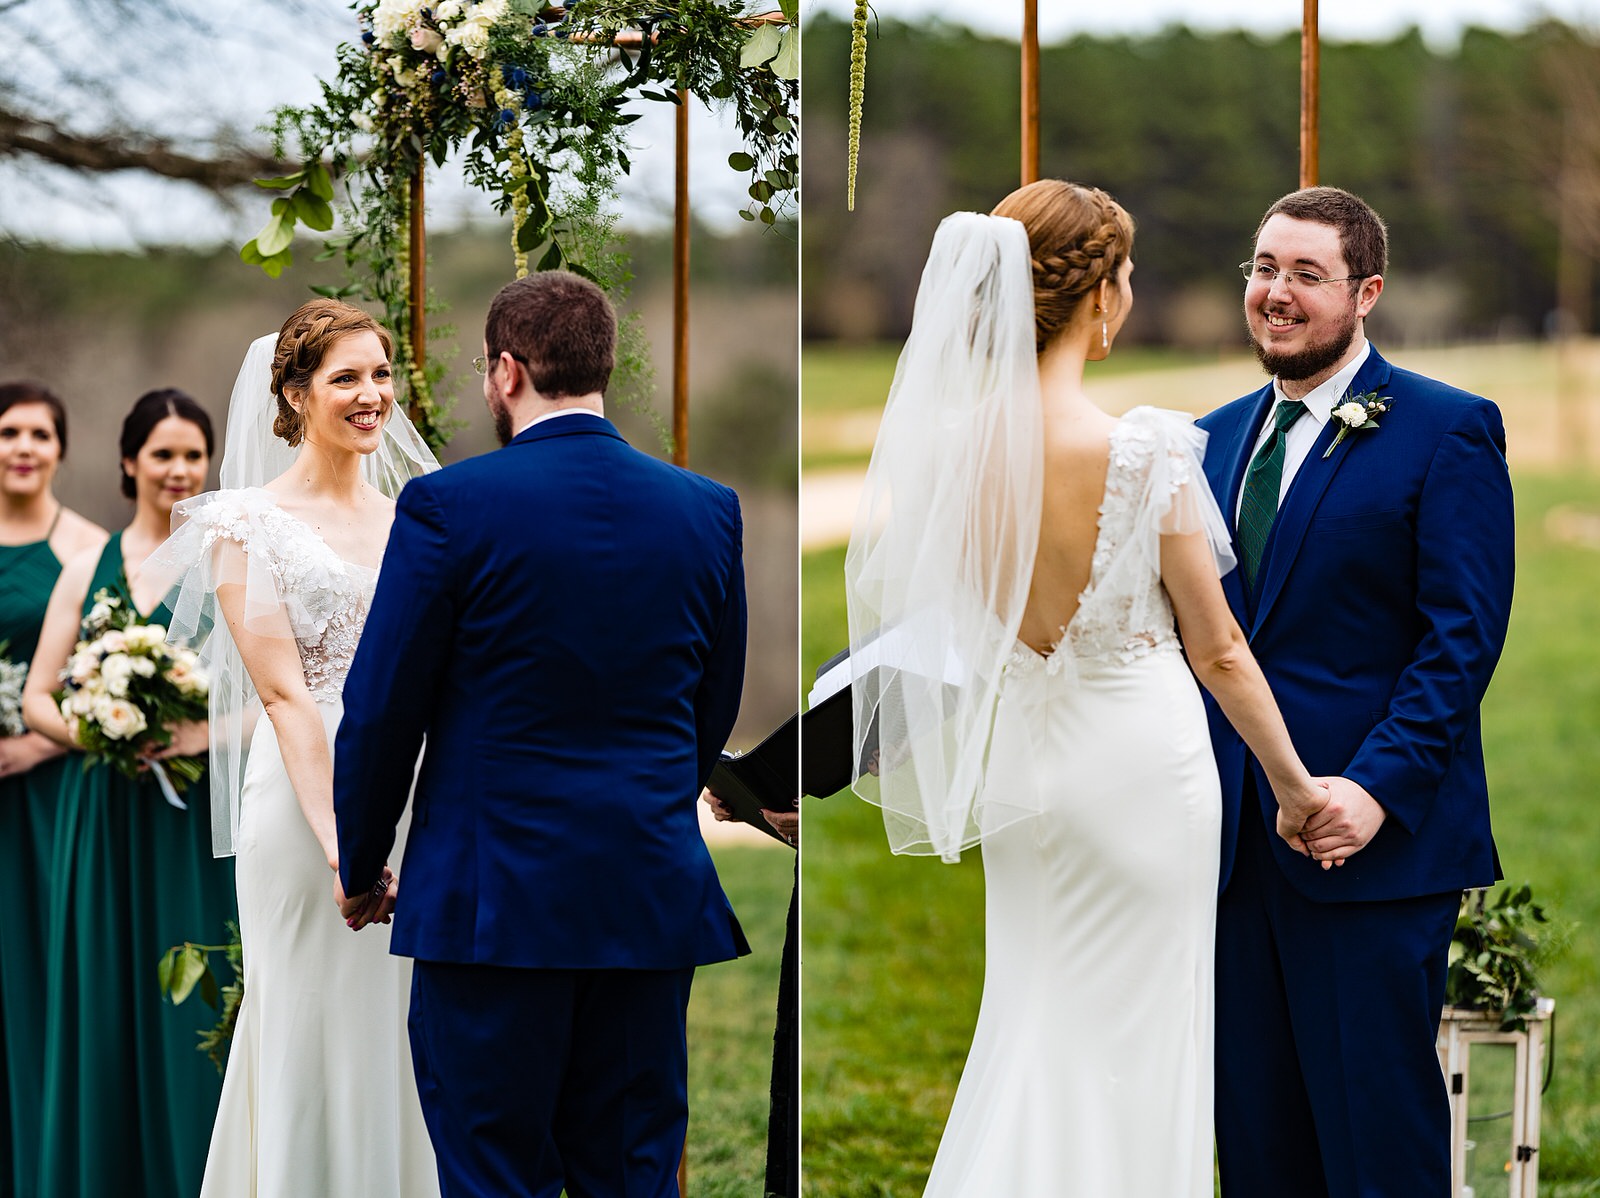 Bride and groom look lovingly at one another during outdoor wedding ceremony at The Meadows Raleigh